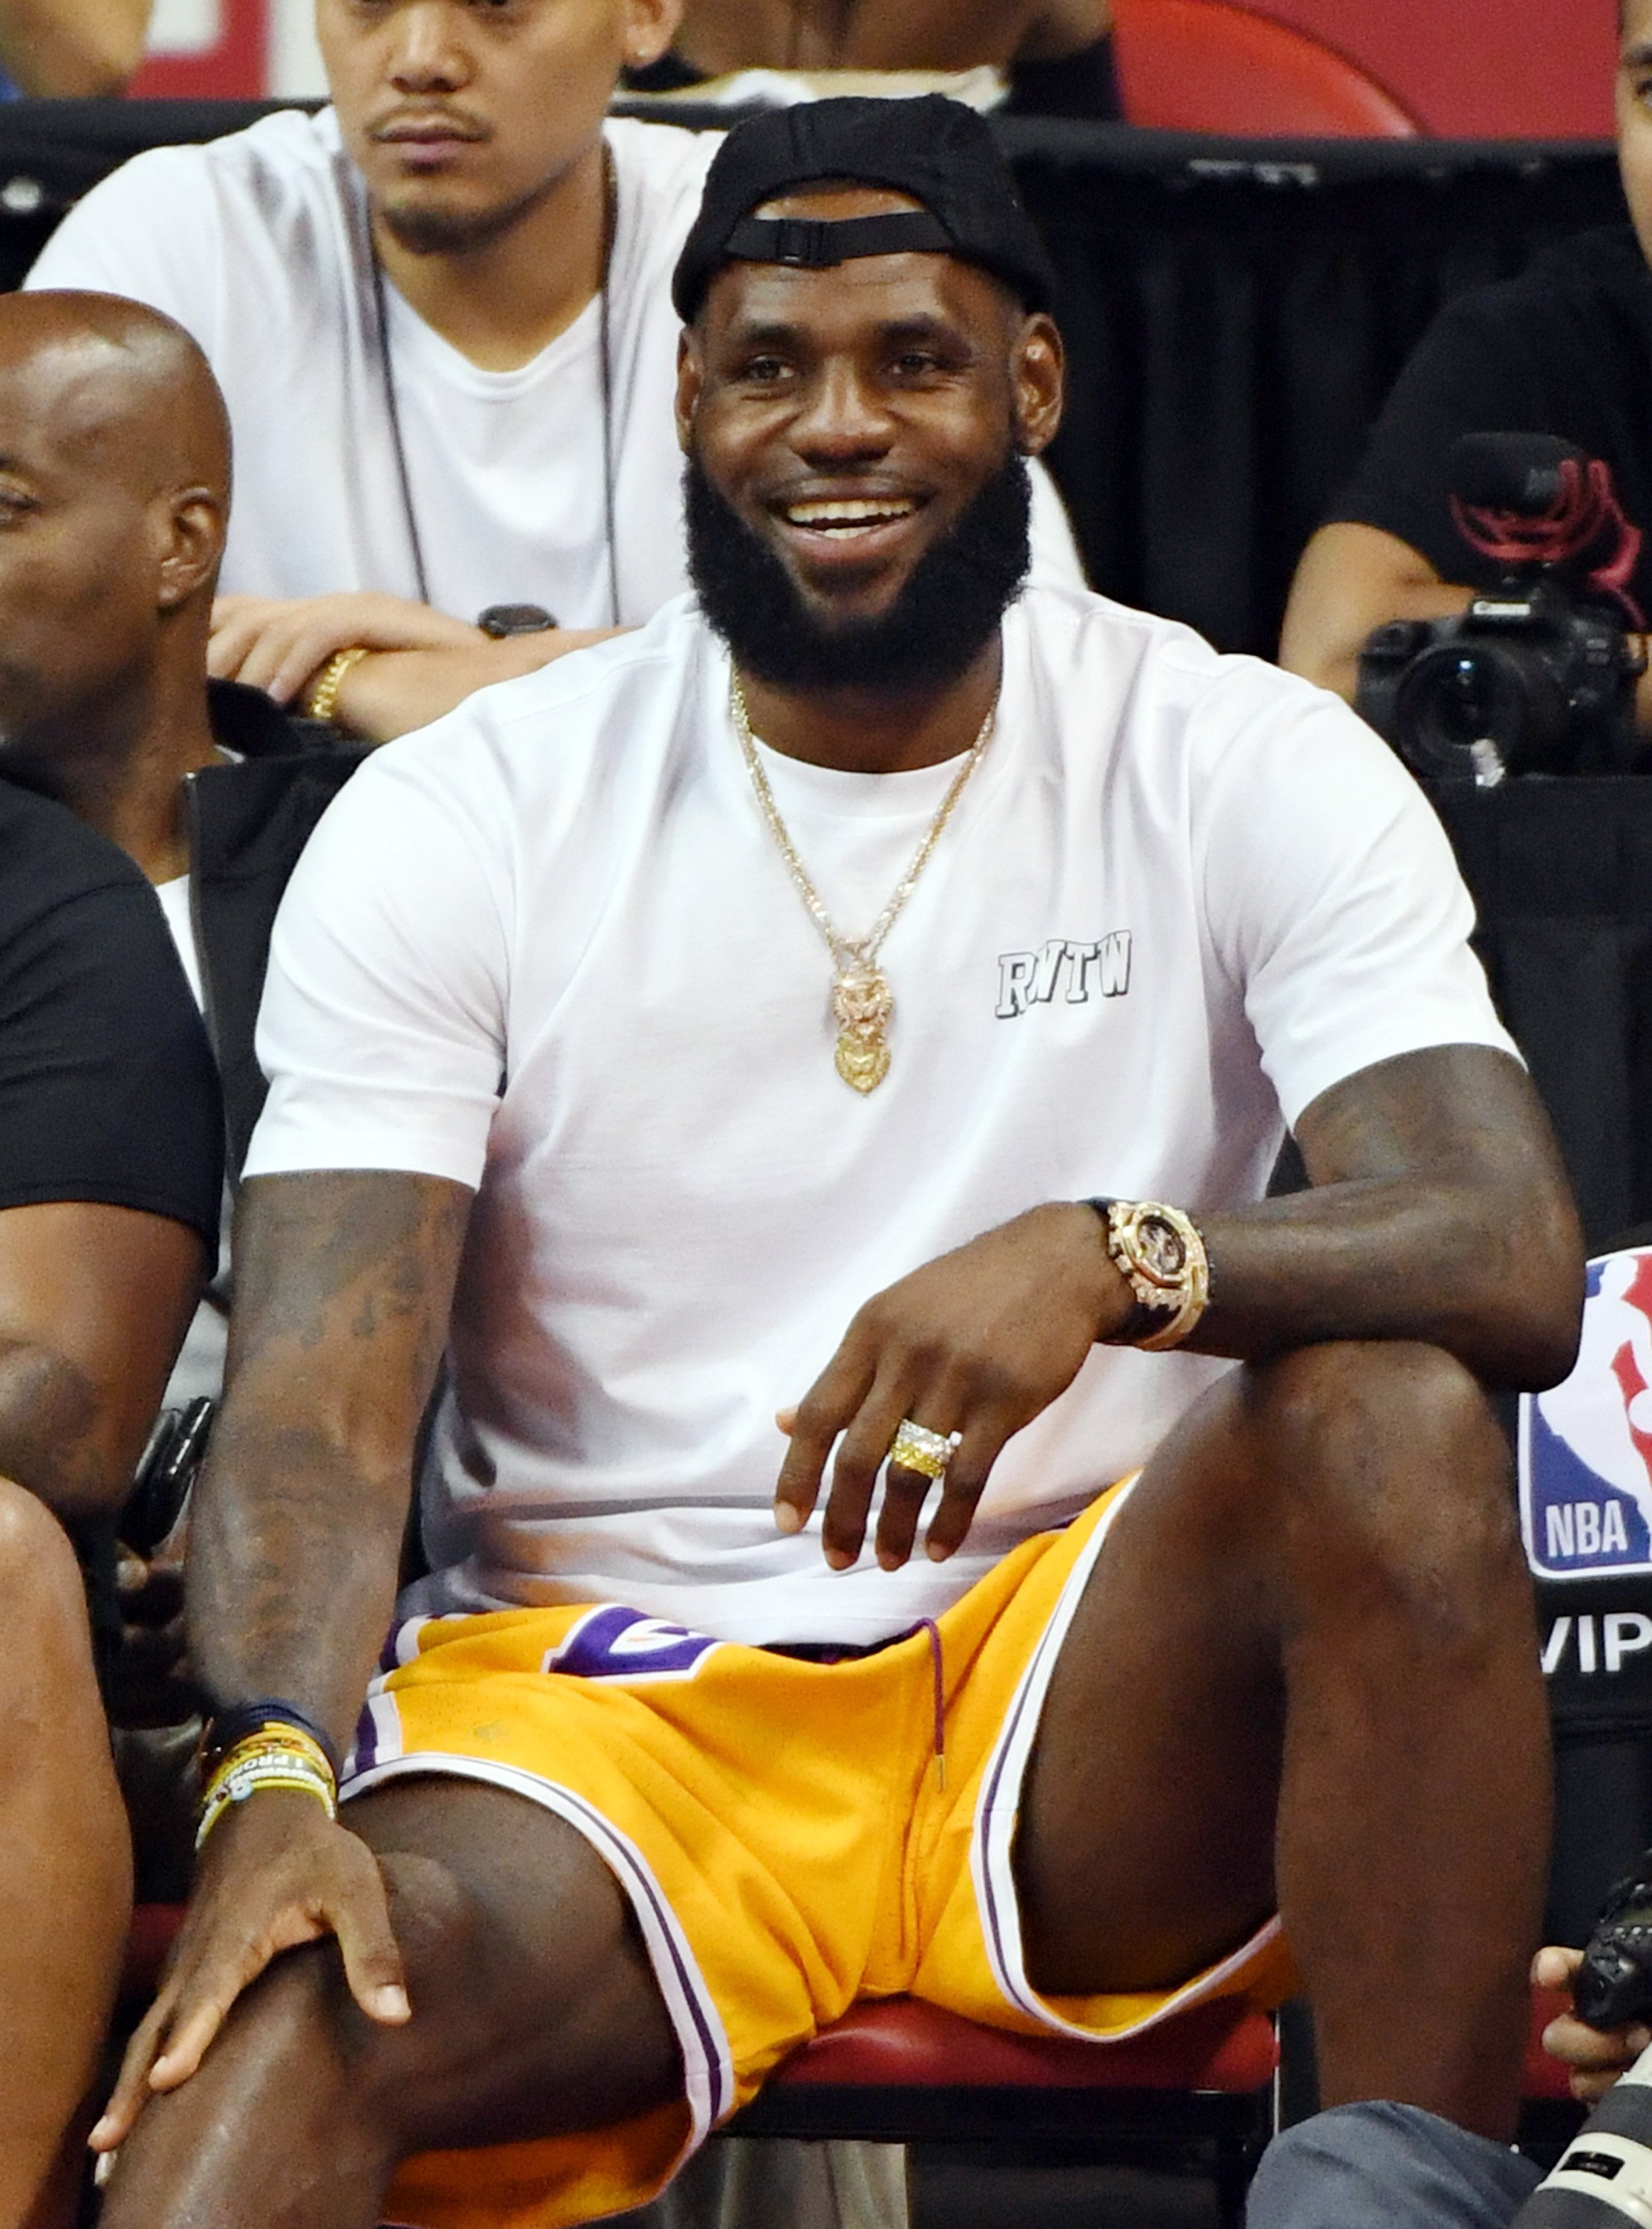 LeBron James attends a quarterfinal game of the 2018 NBA Summer League in Las Vegas, Nevada on July 15, 2018 | Photo: Getty Images